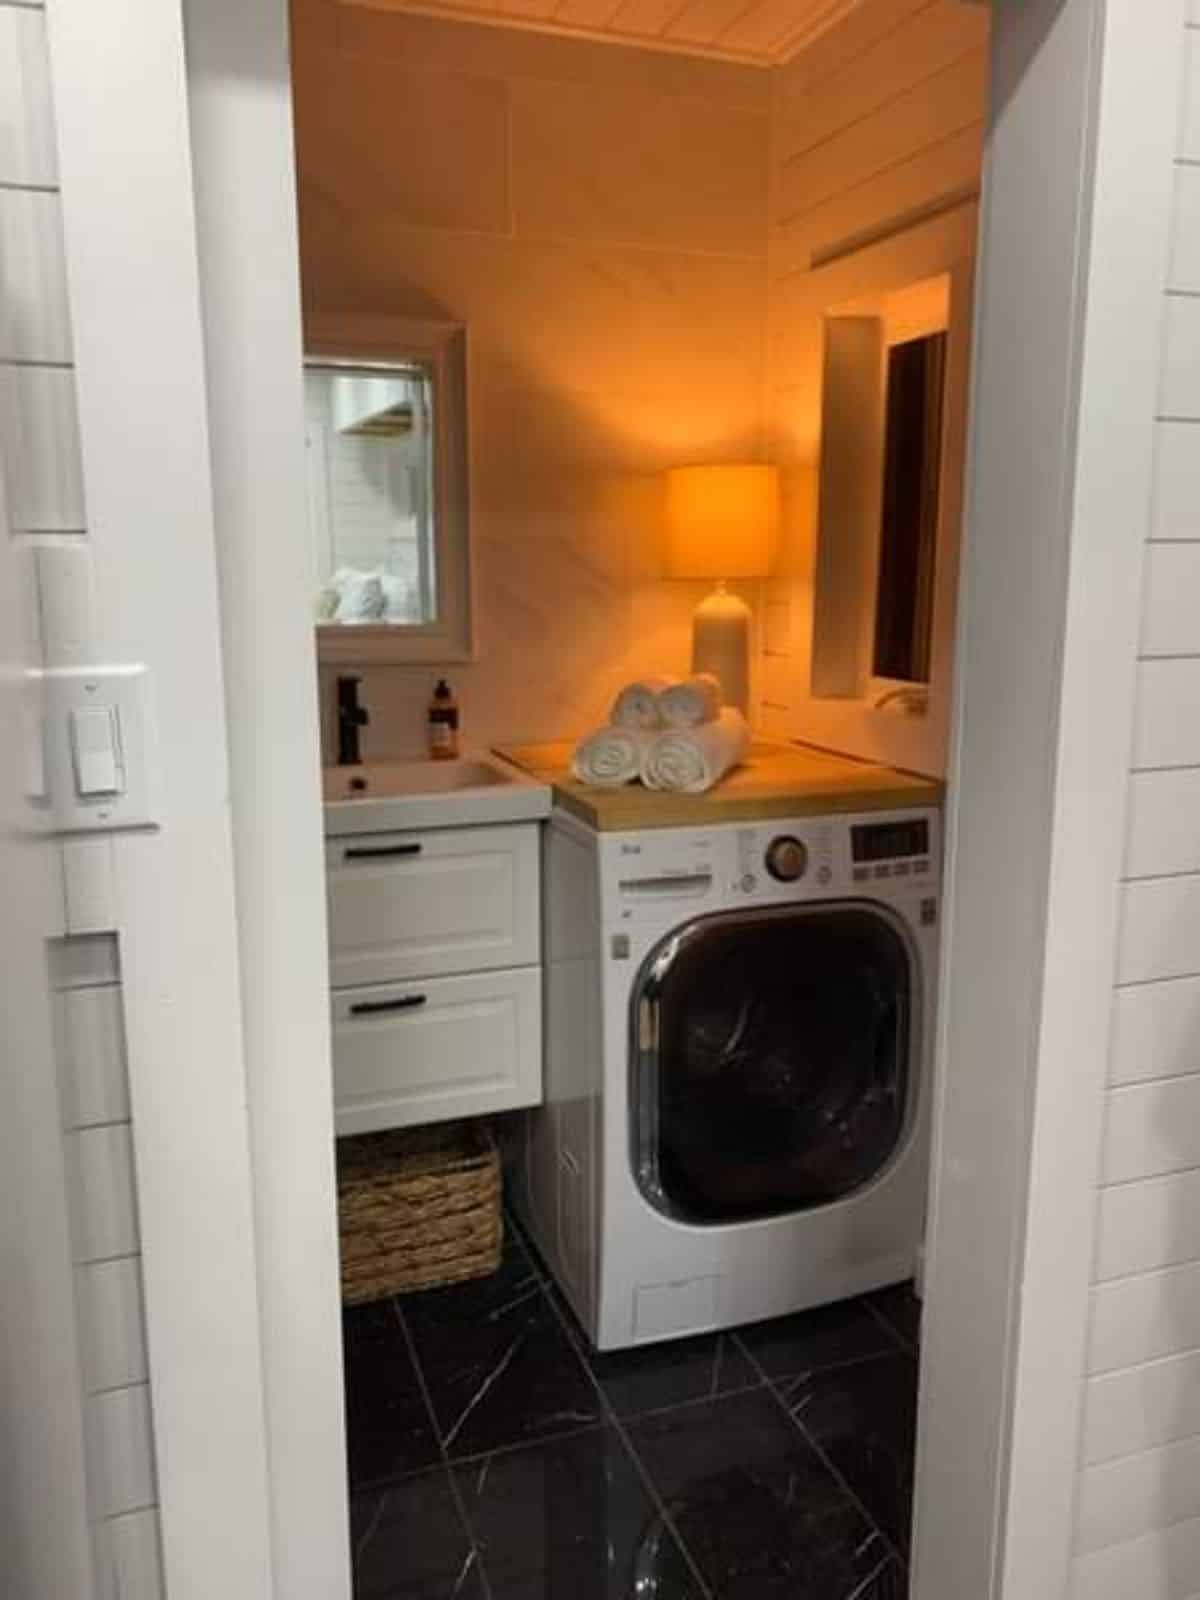 Washer dryer combo is also included into the deal